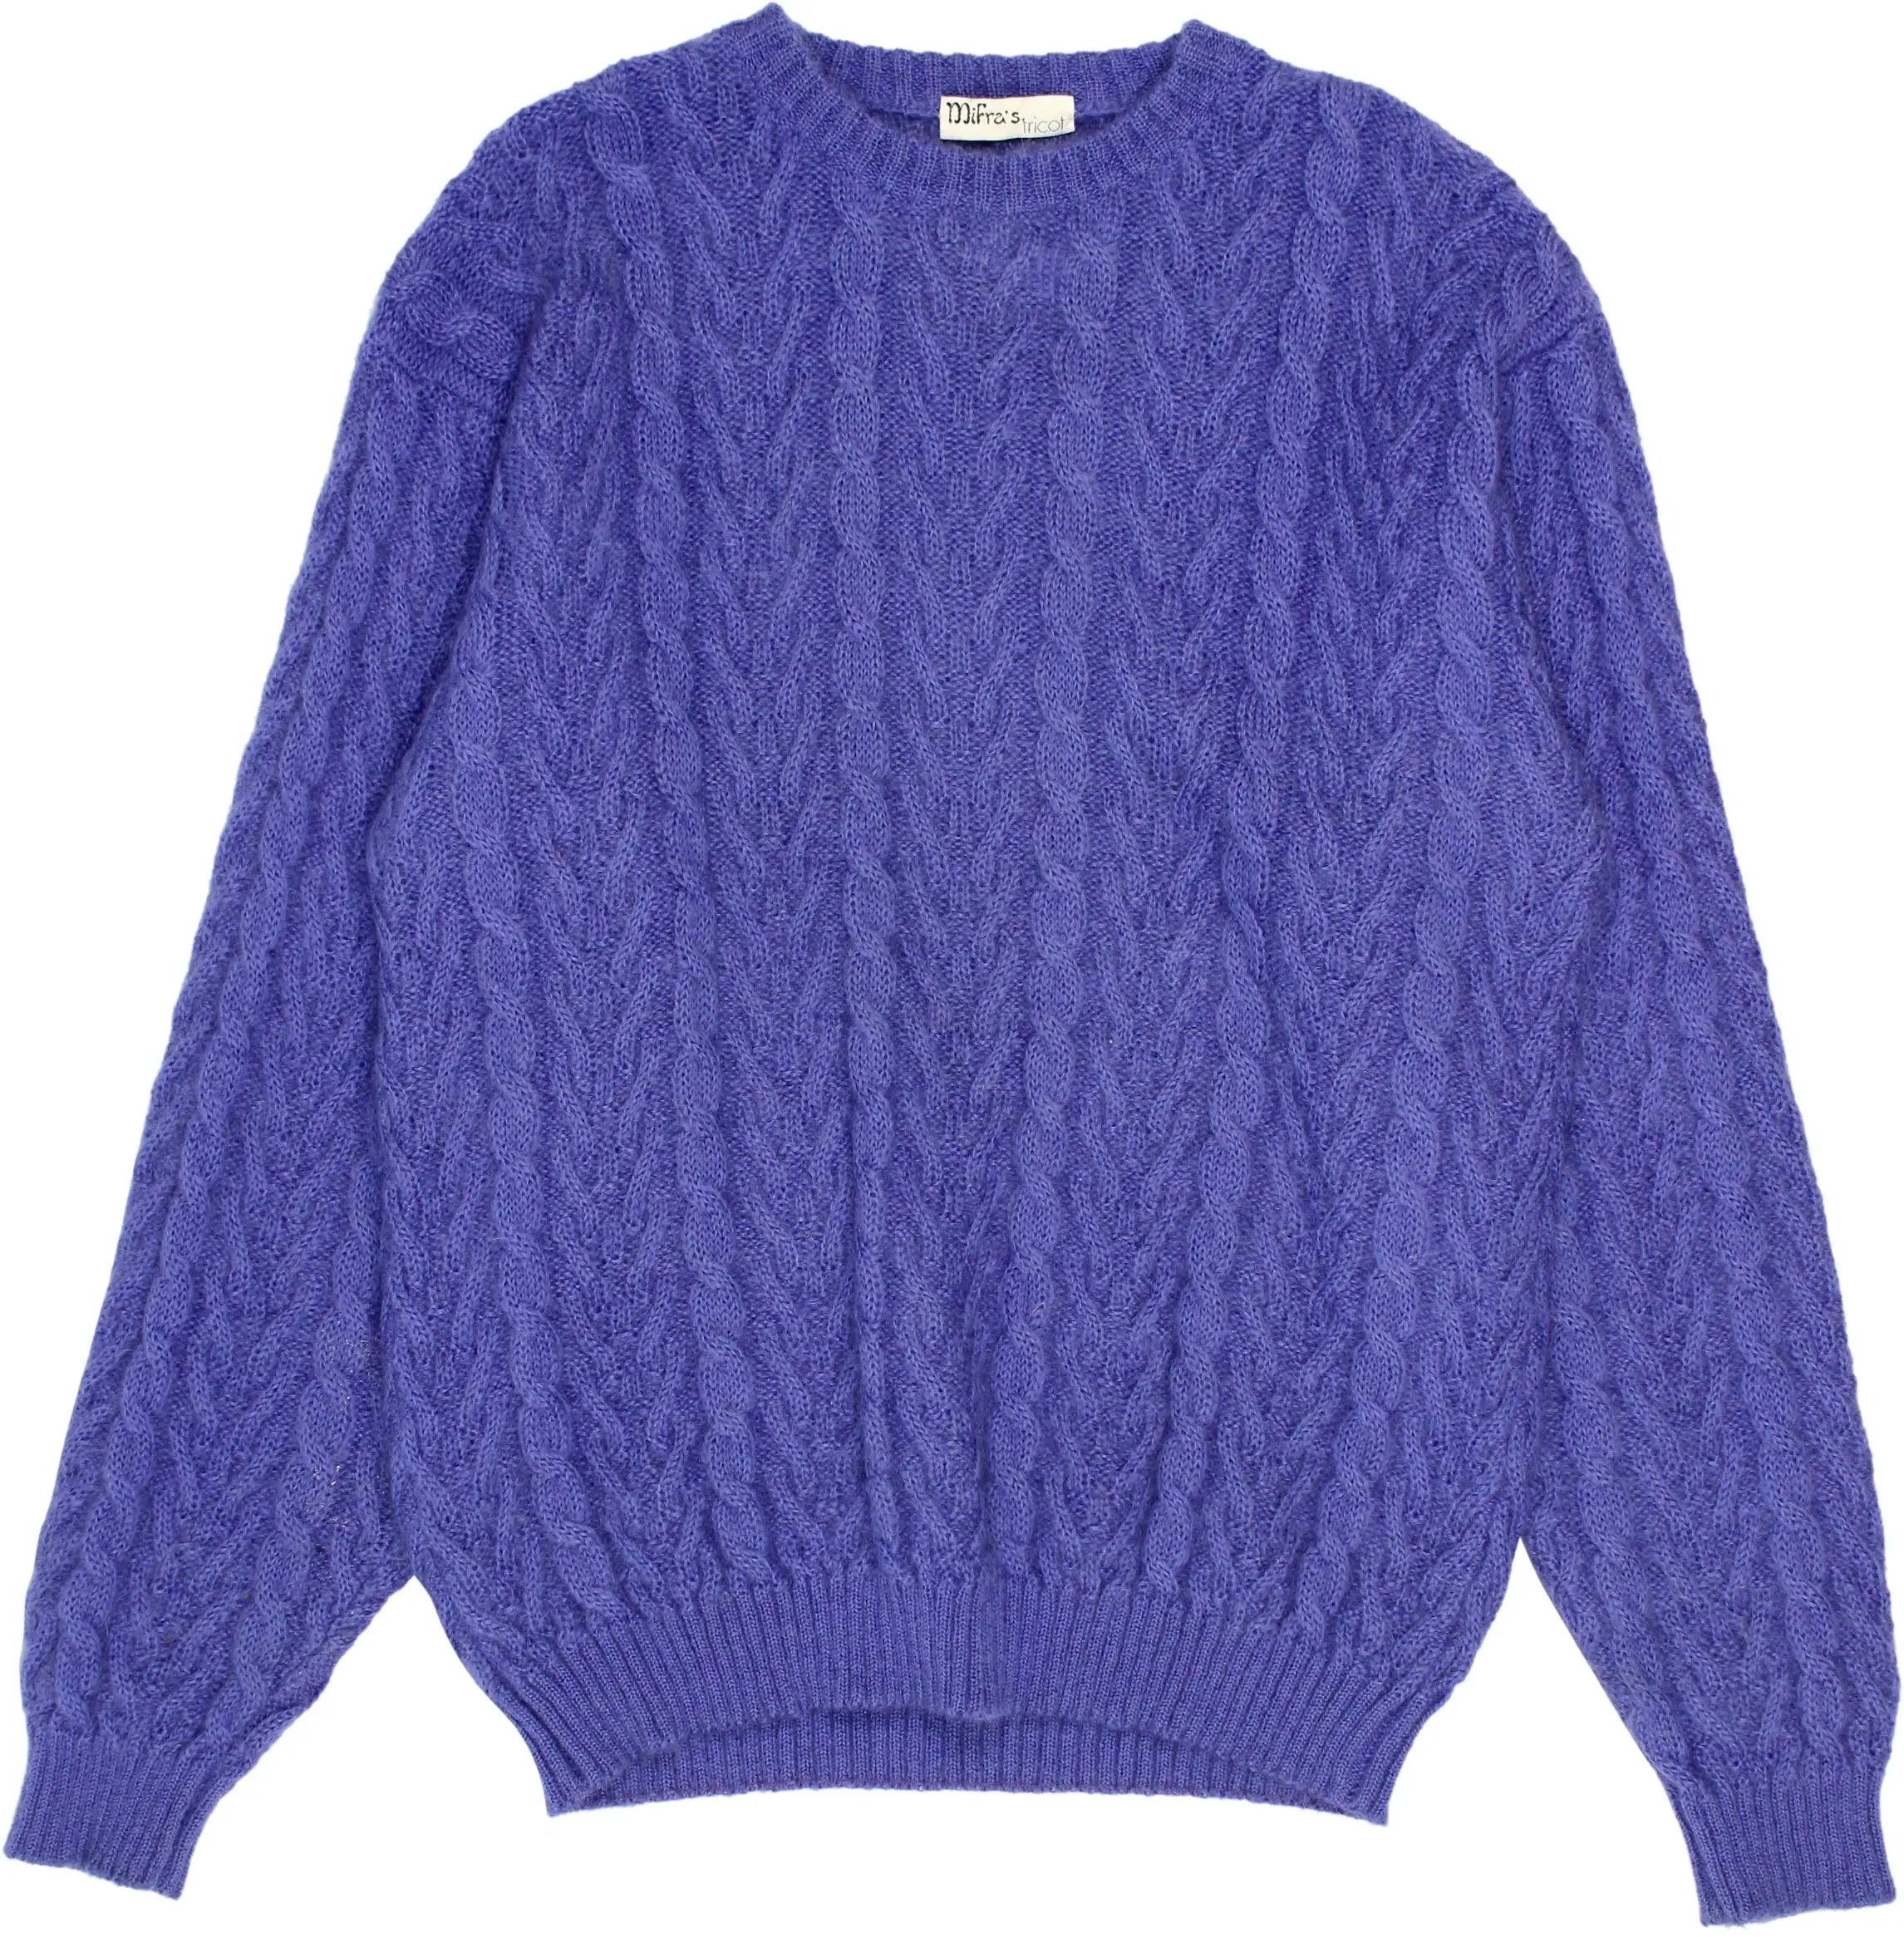 Mifra's Tricot - Knitted Jumper- ThriftTale.com - Vintage and second handclothing